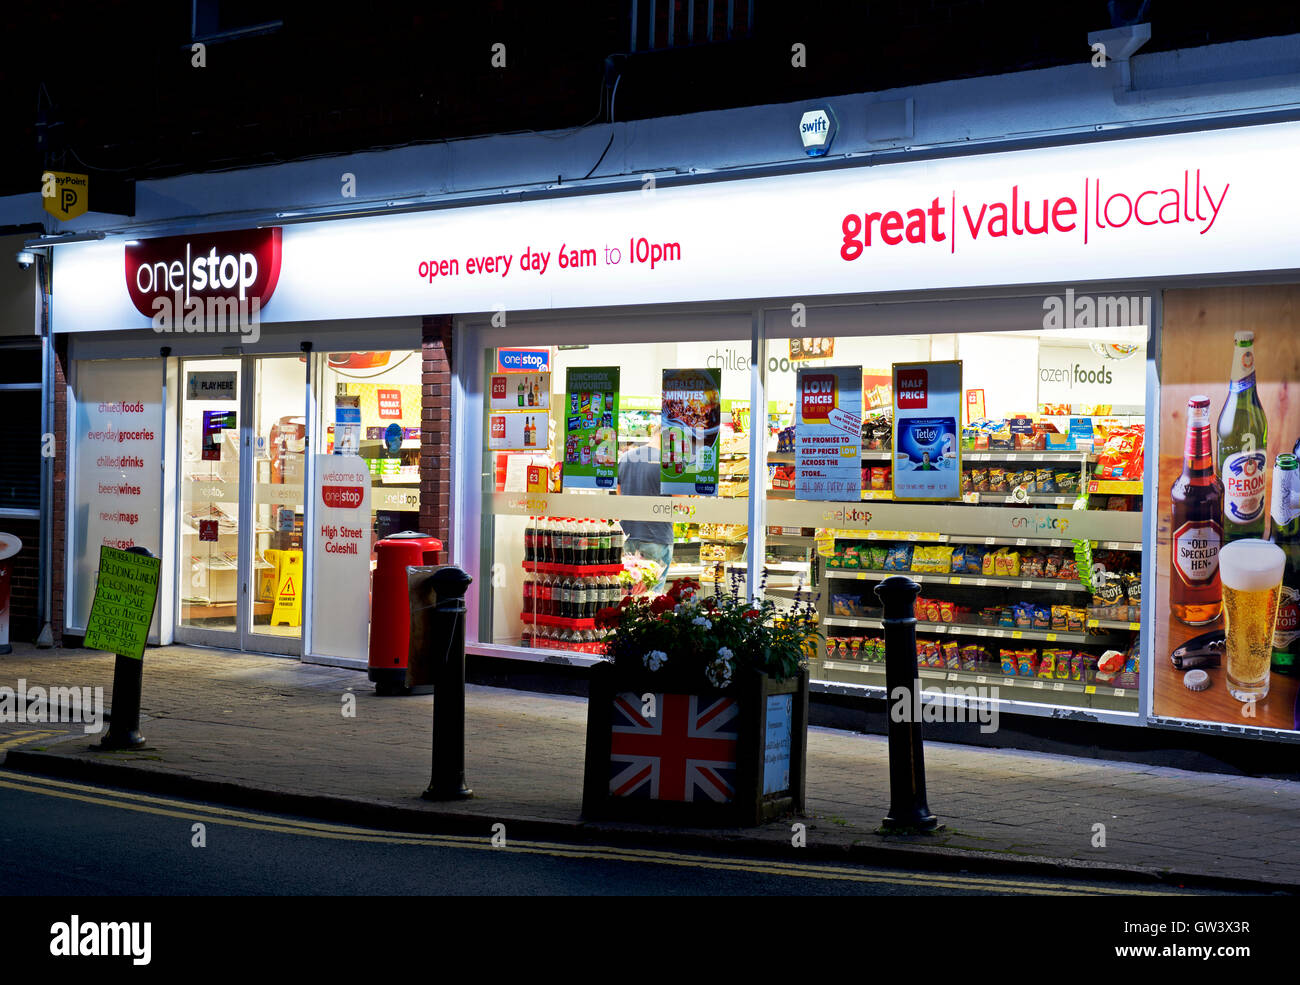 One Stop grocery shop at night, England UK Stock Photo